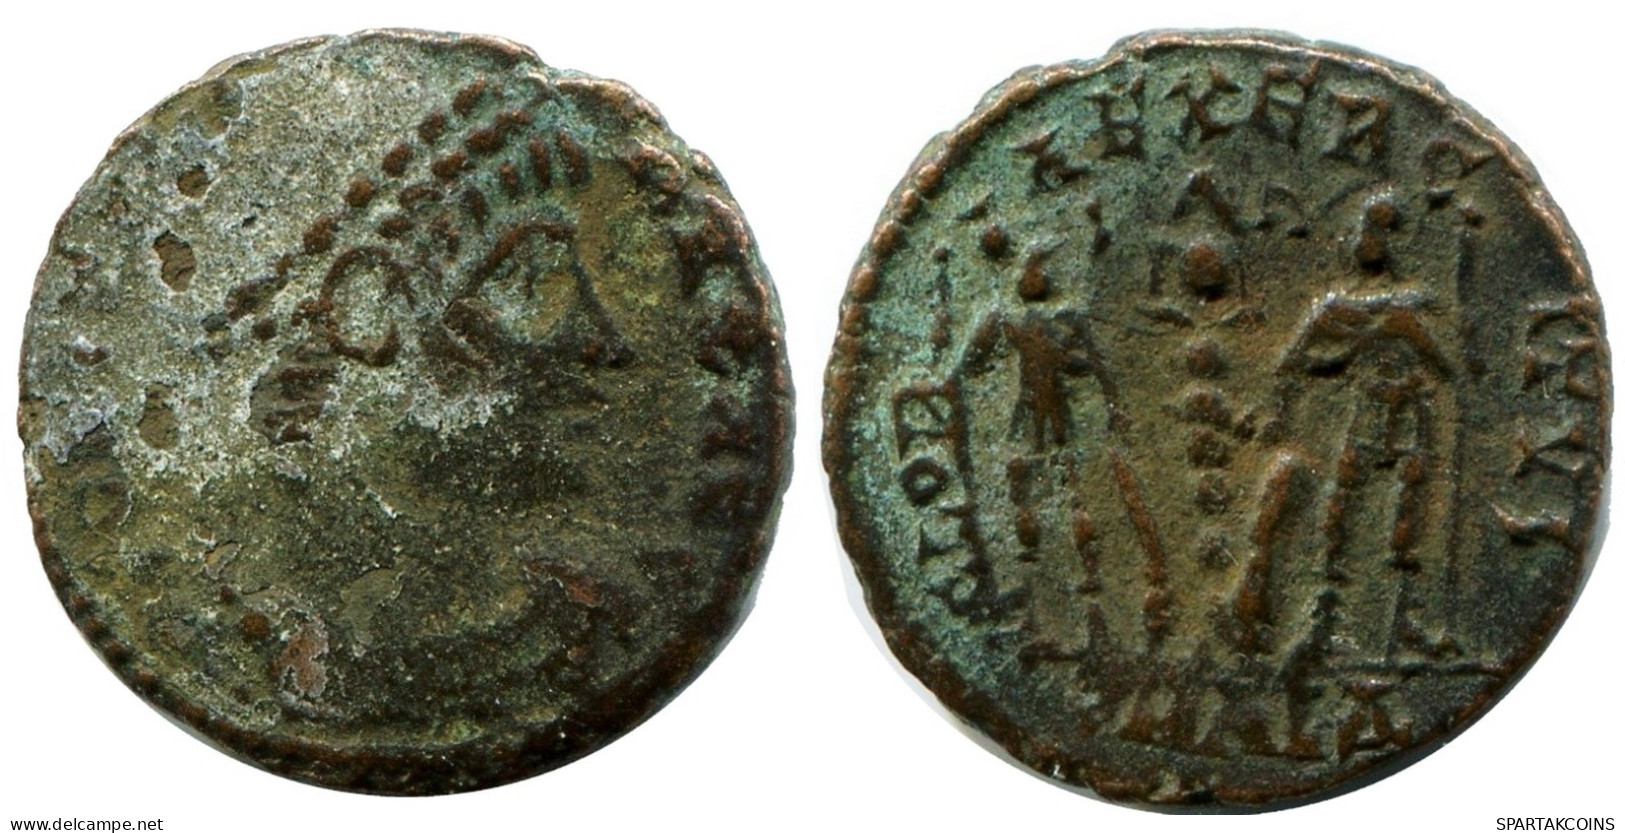 CONSTANS MINTED IN ALEKSANDRIA FROM THE ROYAL ONTARIO MUSEUM #ANC11409.14.E.A - El Impero Christiano (307 / 363)